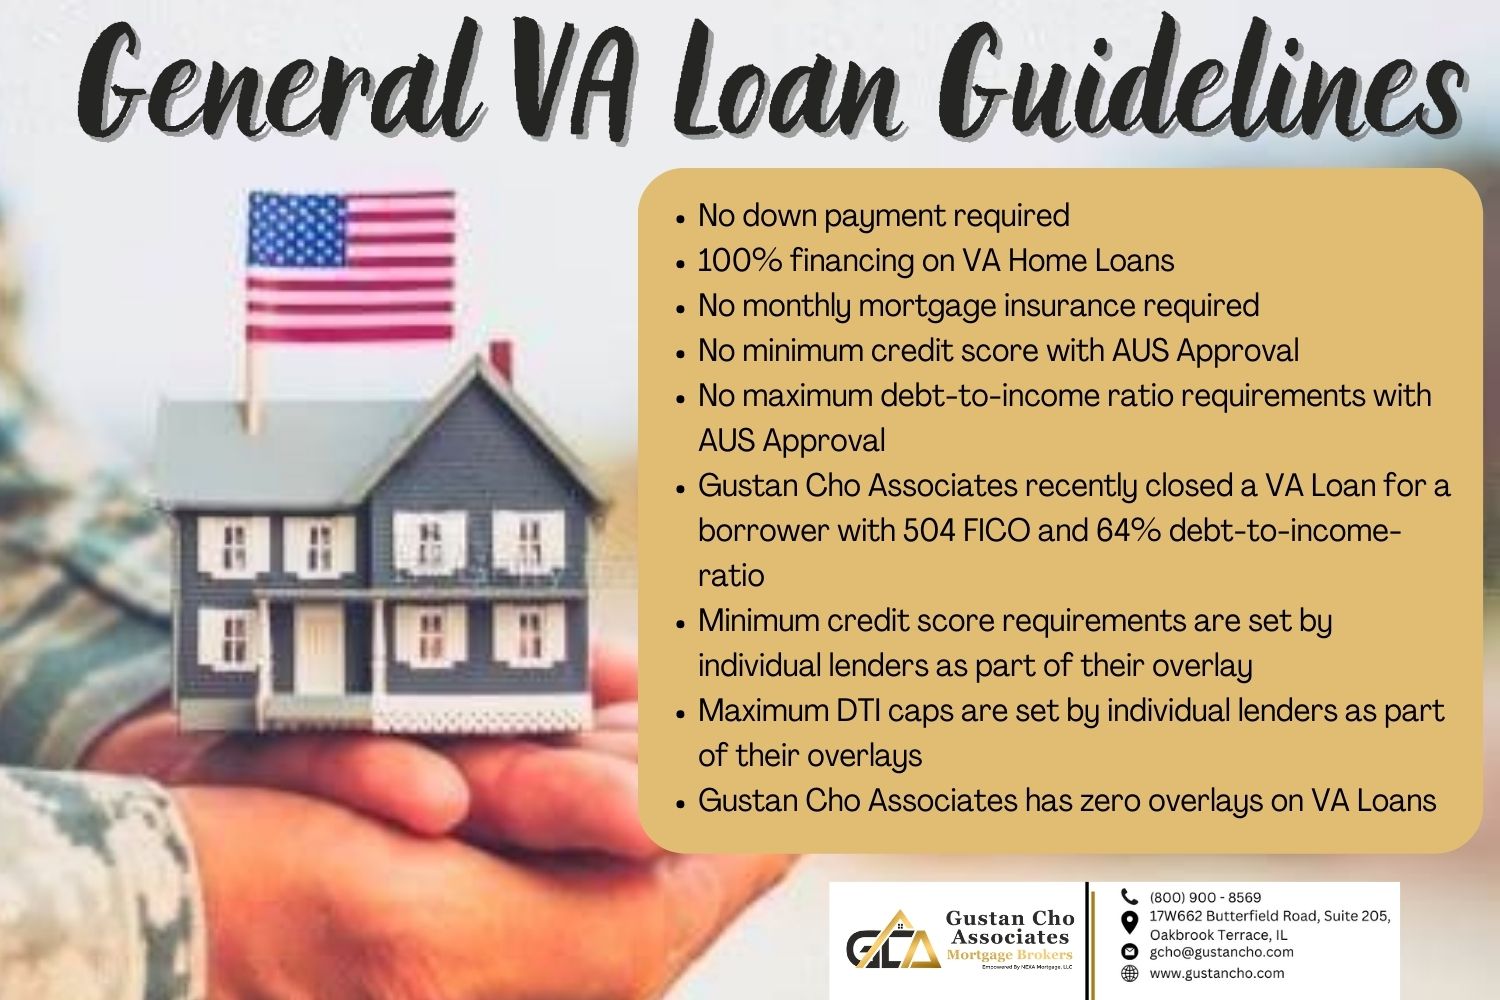 VA Credit Score and DTI Guidelines on Purchase and Refinance